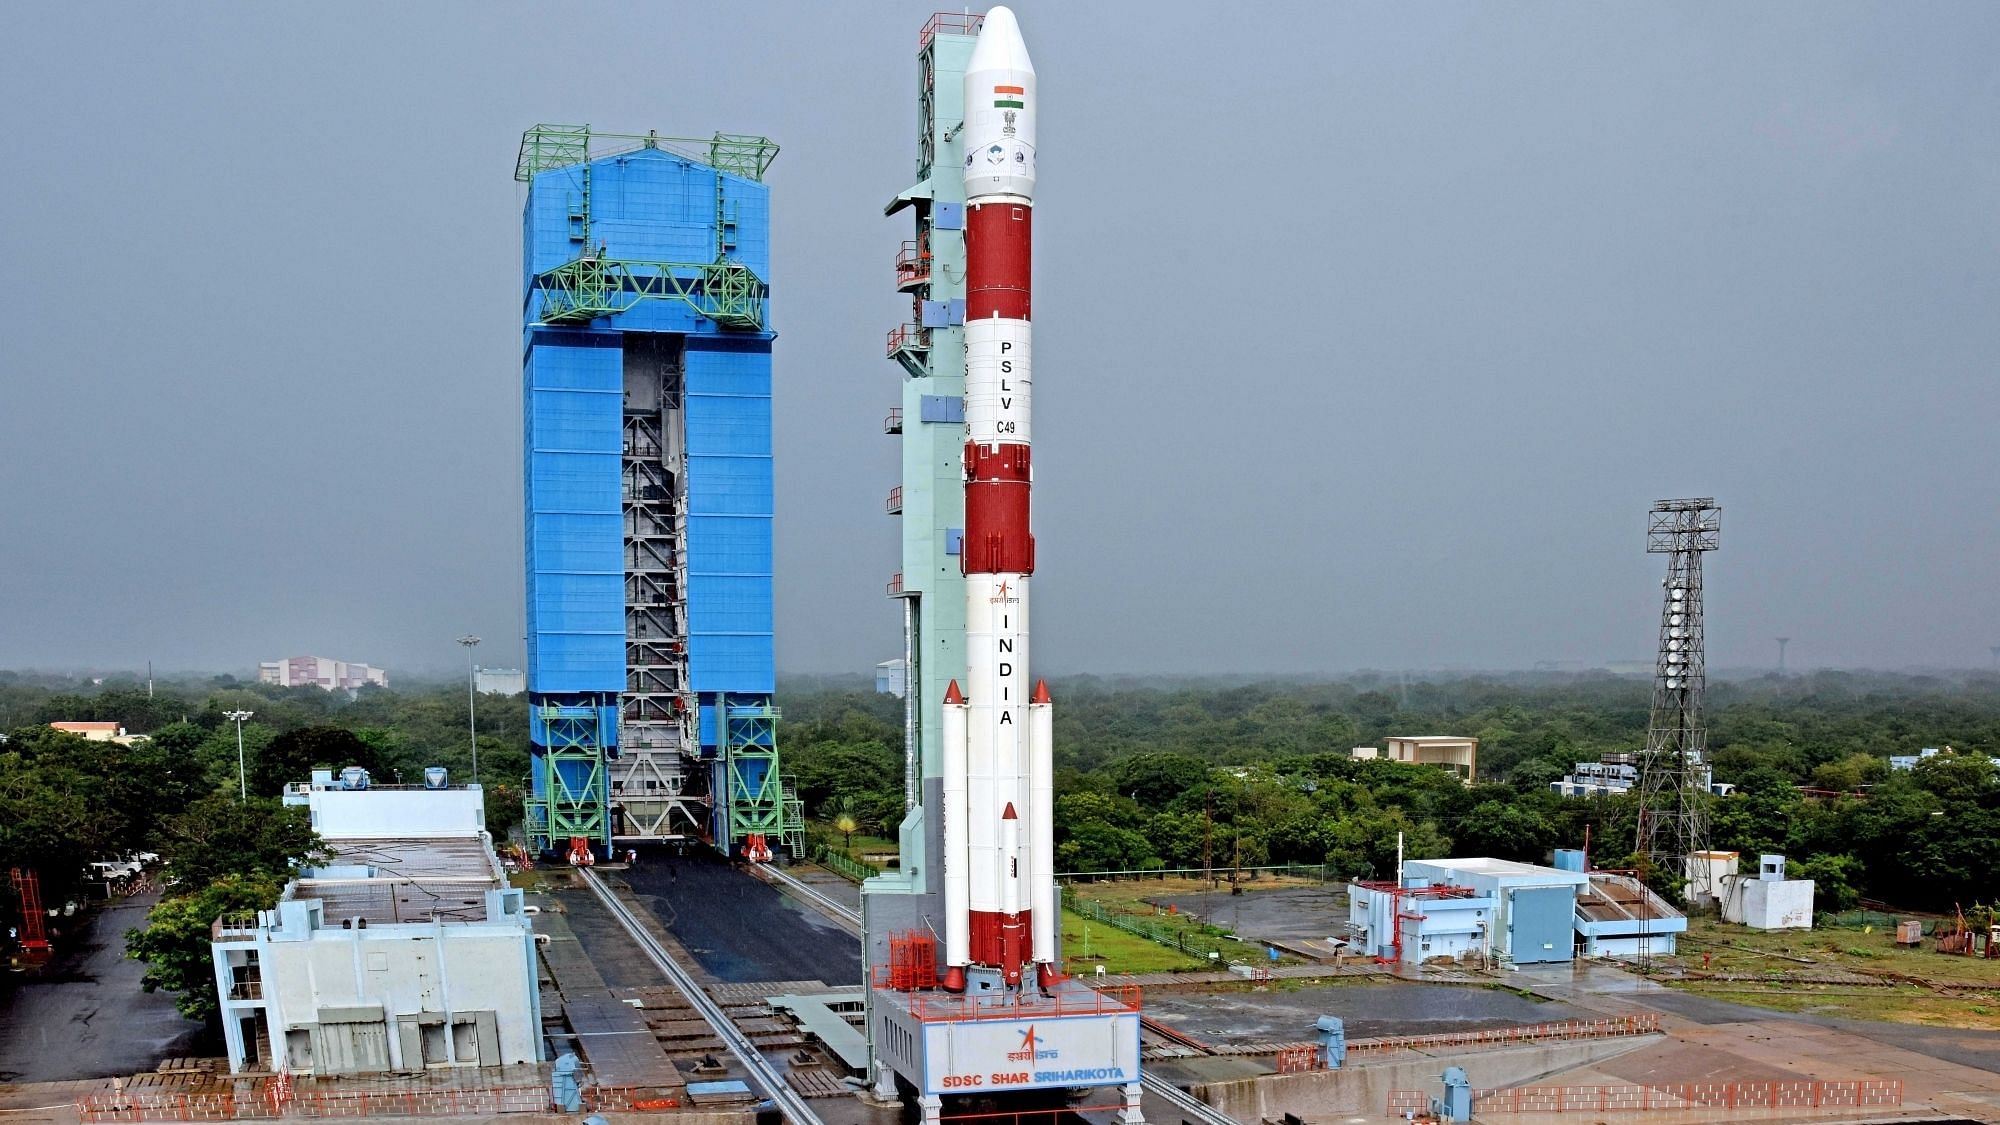 ISRO on Saturday, 7 November, launched the Polar Satellite Launch Vehicle-C49 (PSLV-C49/EOS-01) at 3:12 pm from Sriharikota.